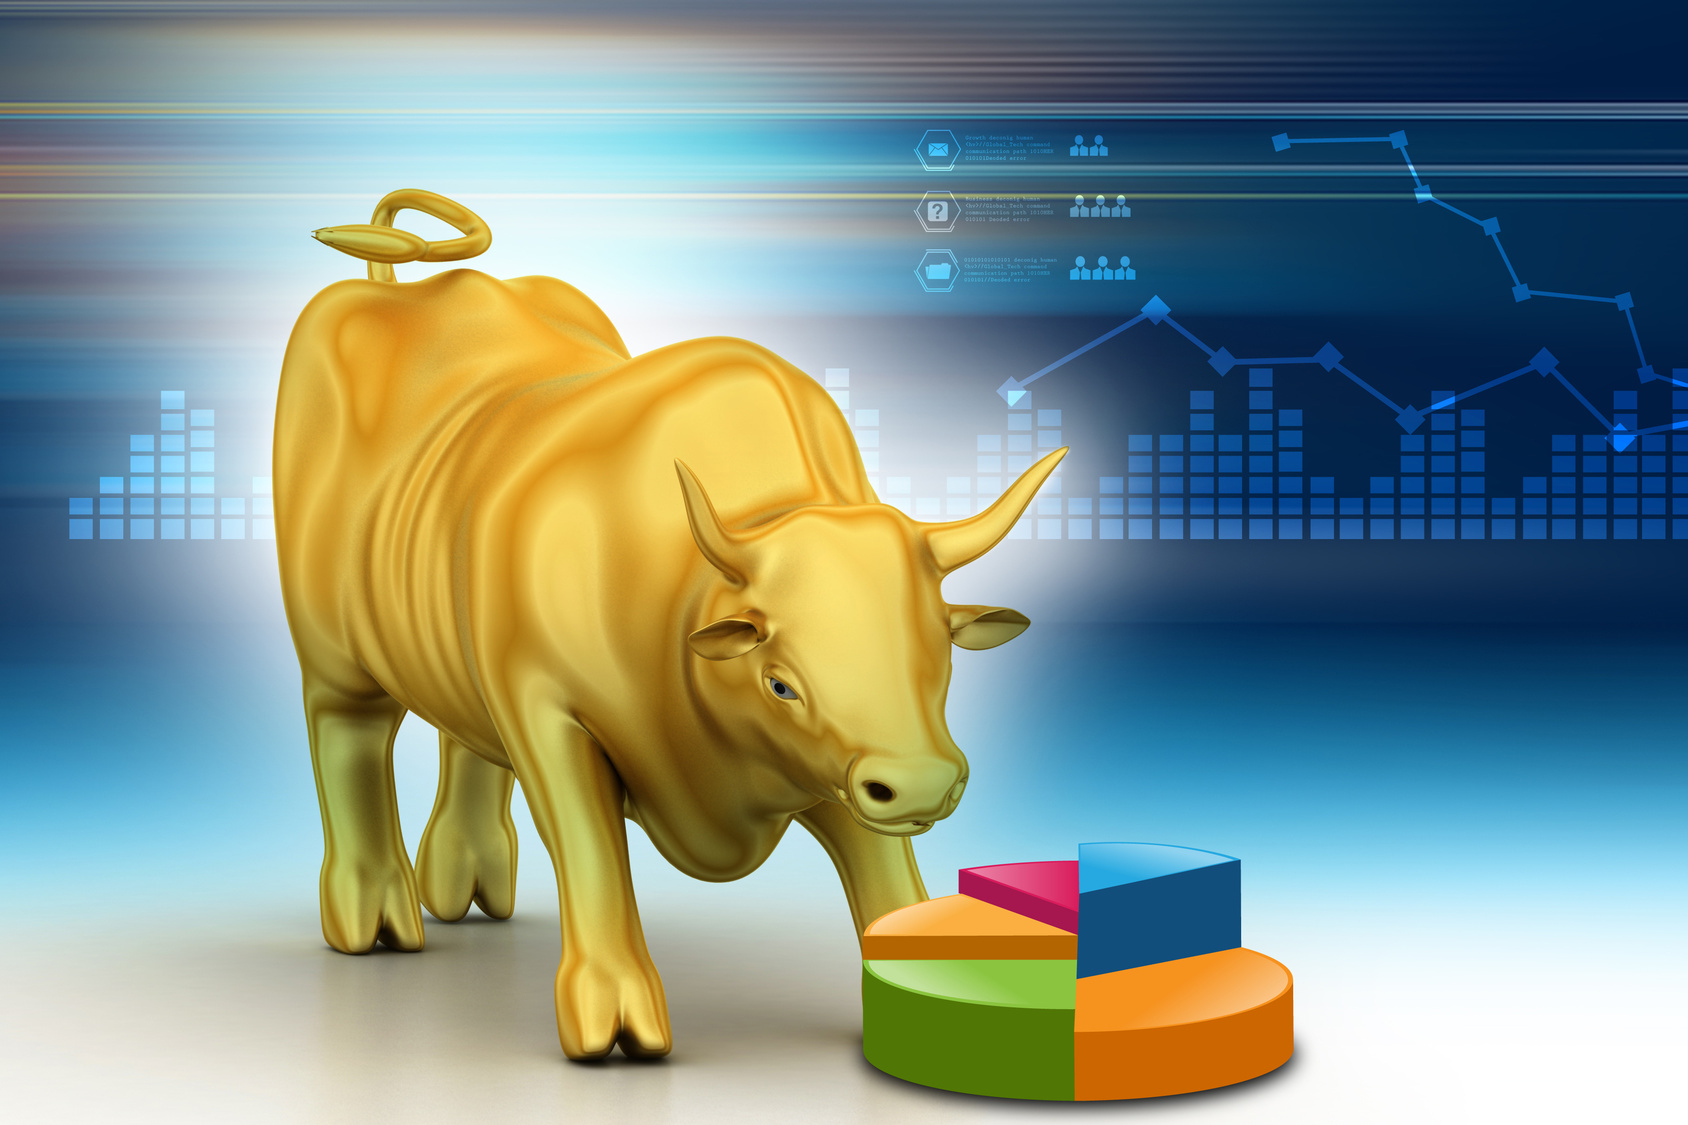 Why Gold Bulls Should Have Hope